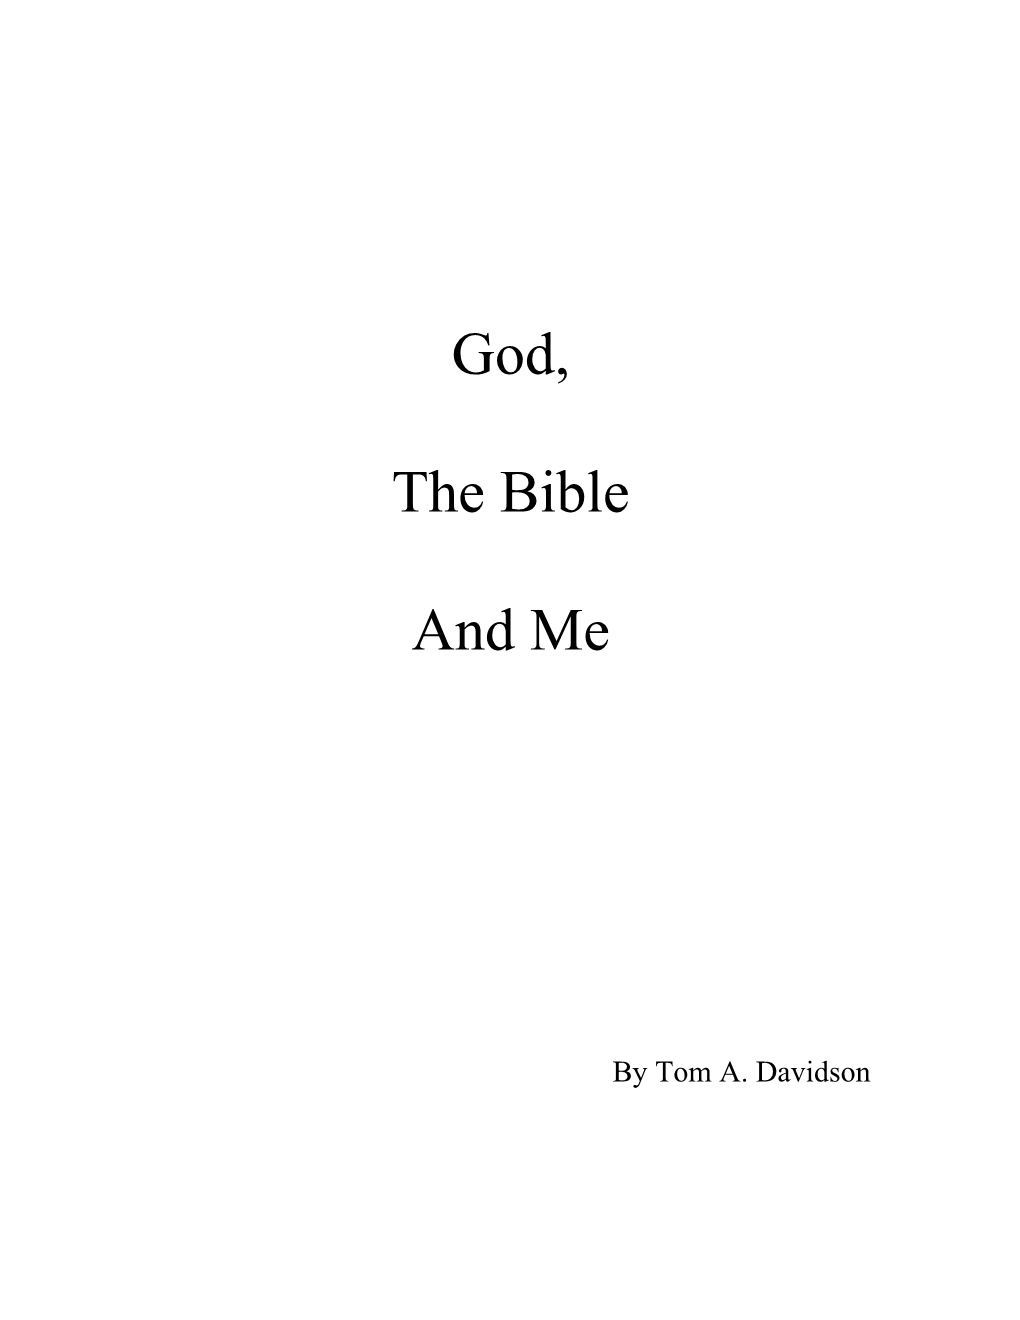 God, the Bible and Me